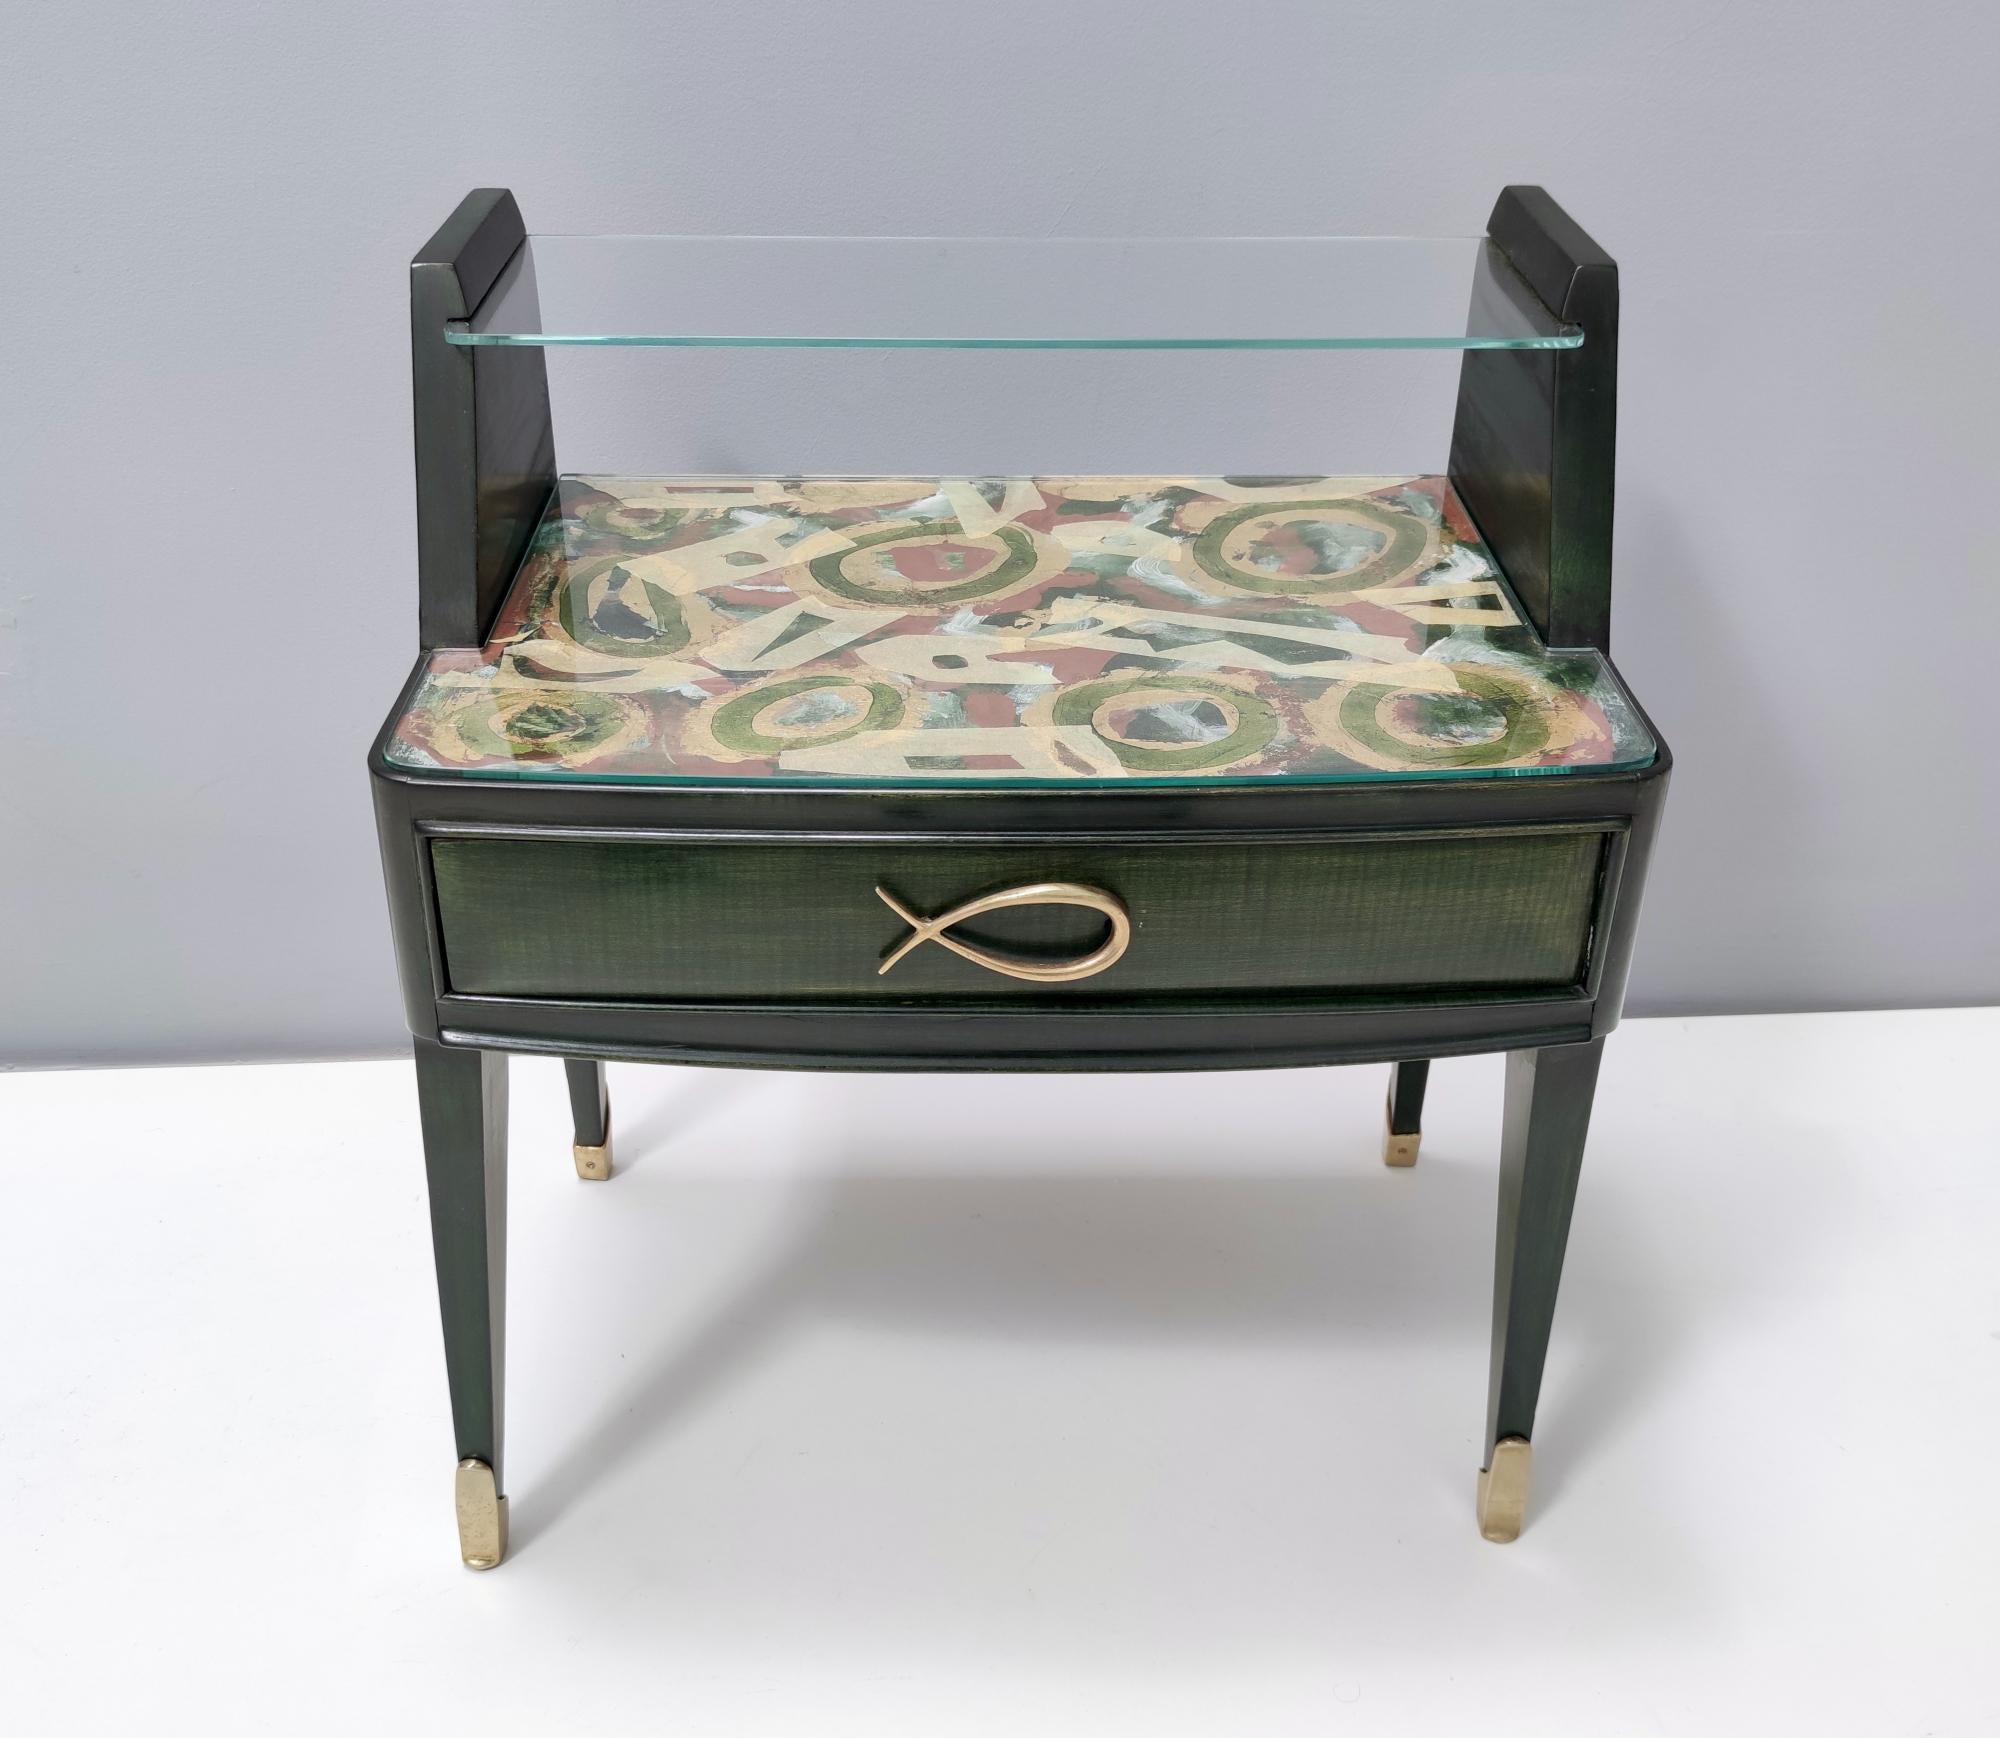 Italian Pair of Dark Green Wooden Nightstands in 1950s Style with a Decorated Top, Italy For Sale